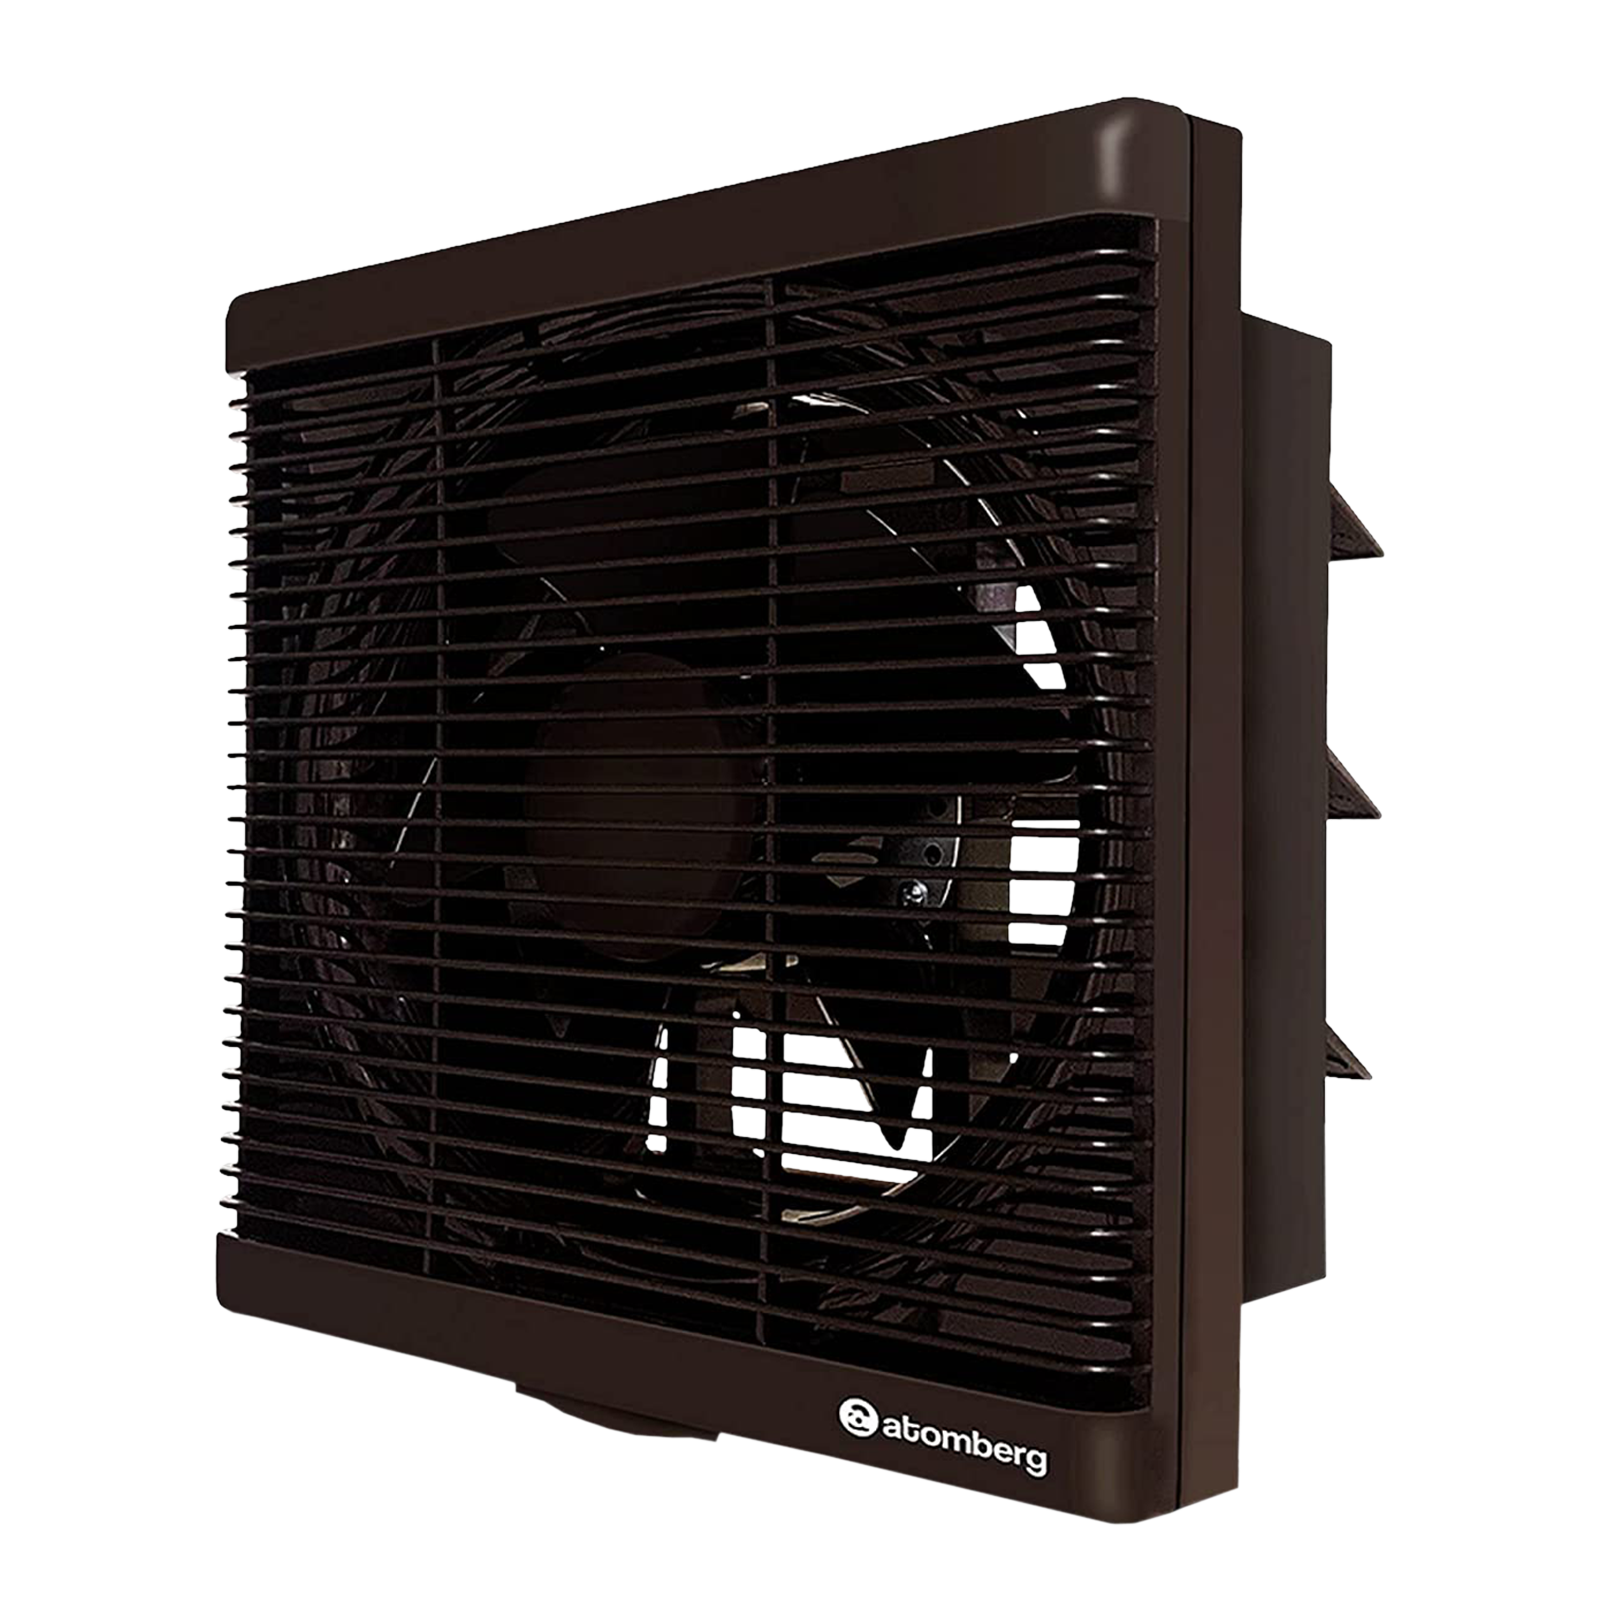 atomberg Efficio 10 Inch 250mm Exhaust Fan with BLDC Motor (Silent Operation, Umber Brown)